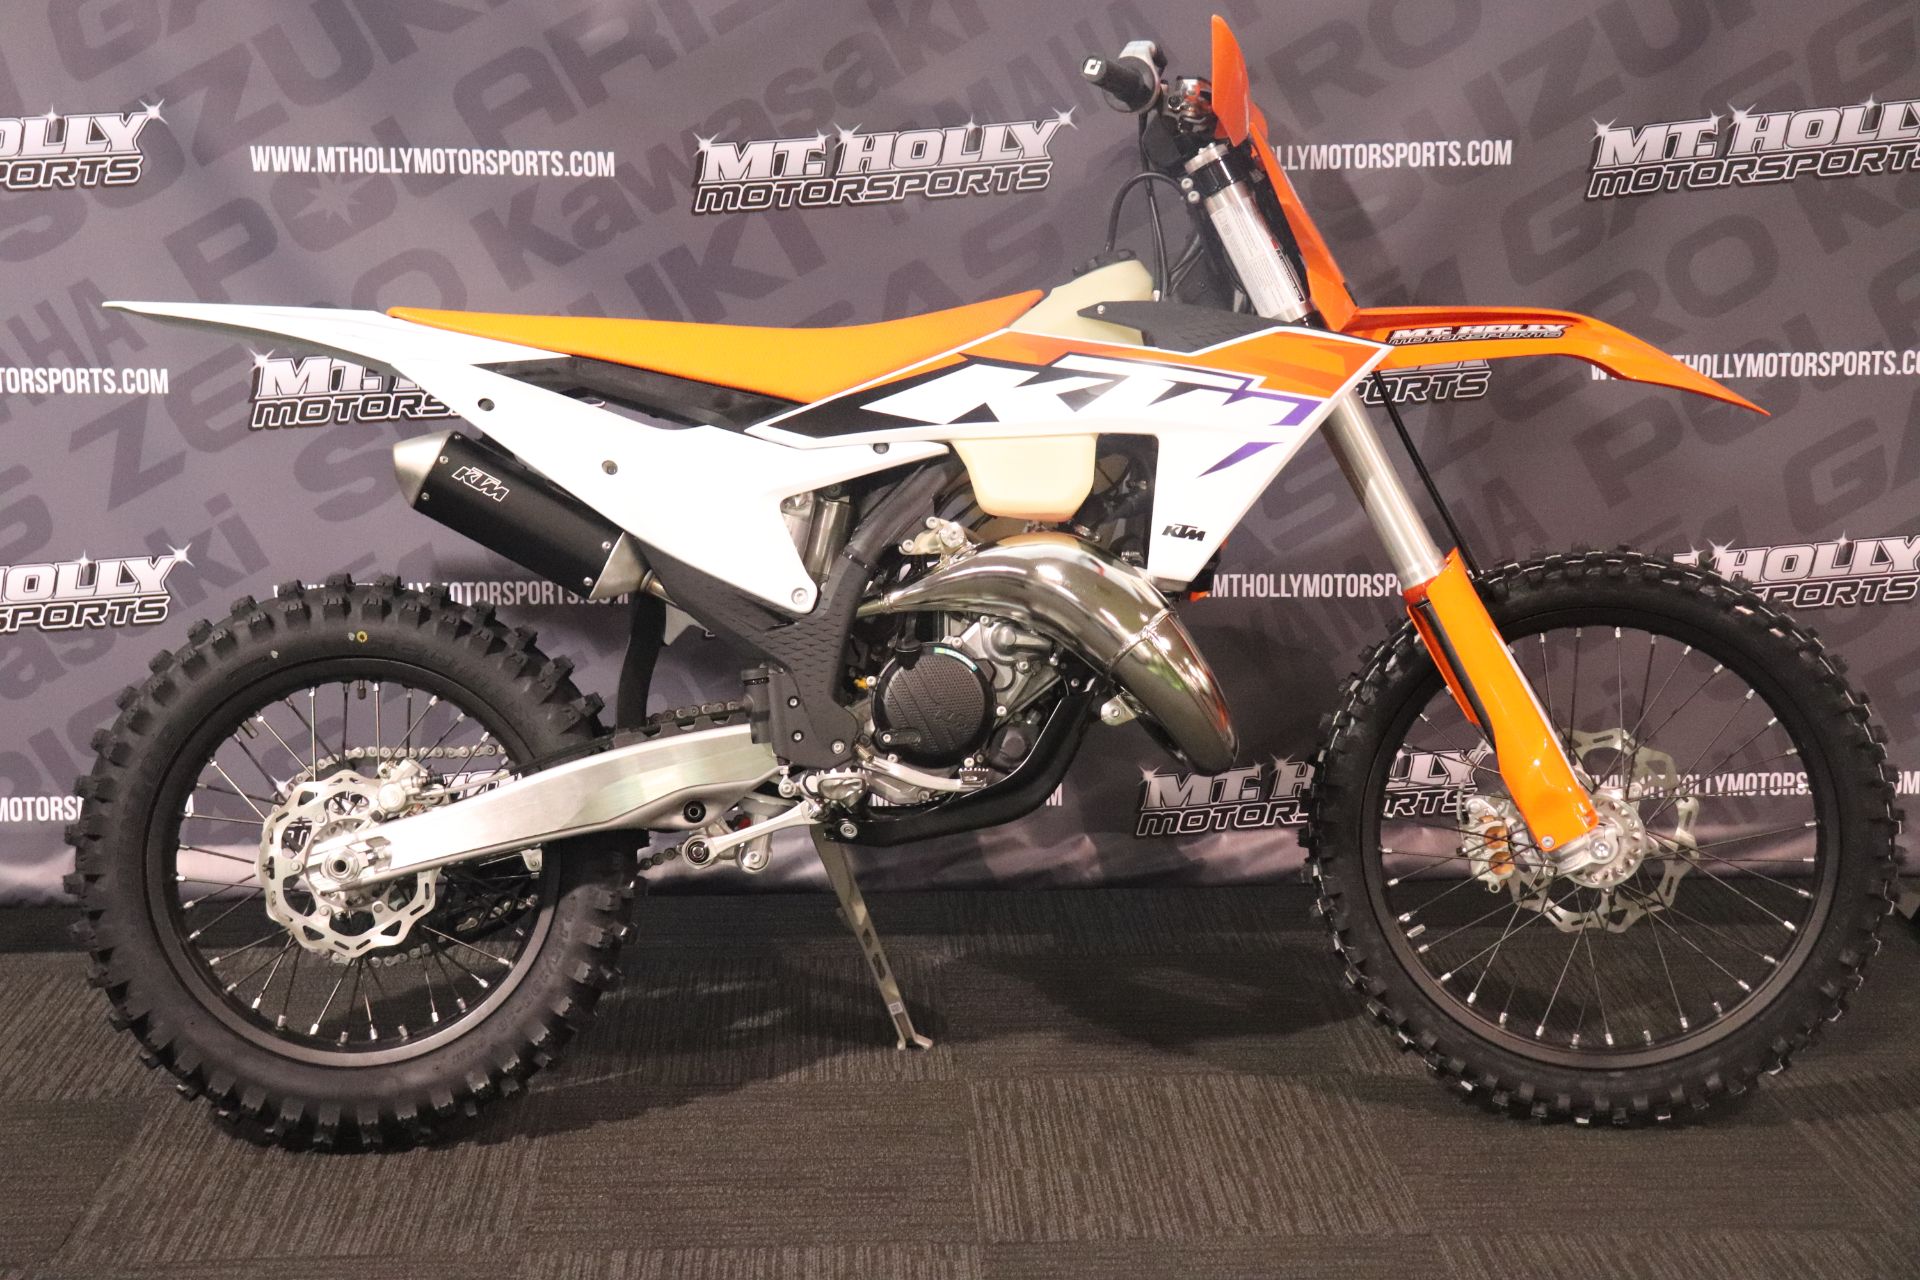 2023 KTM 125 XC in Vincentown, New Jersey - Photo 1